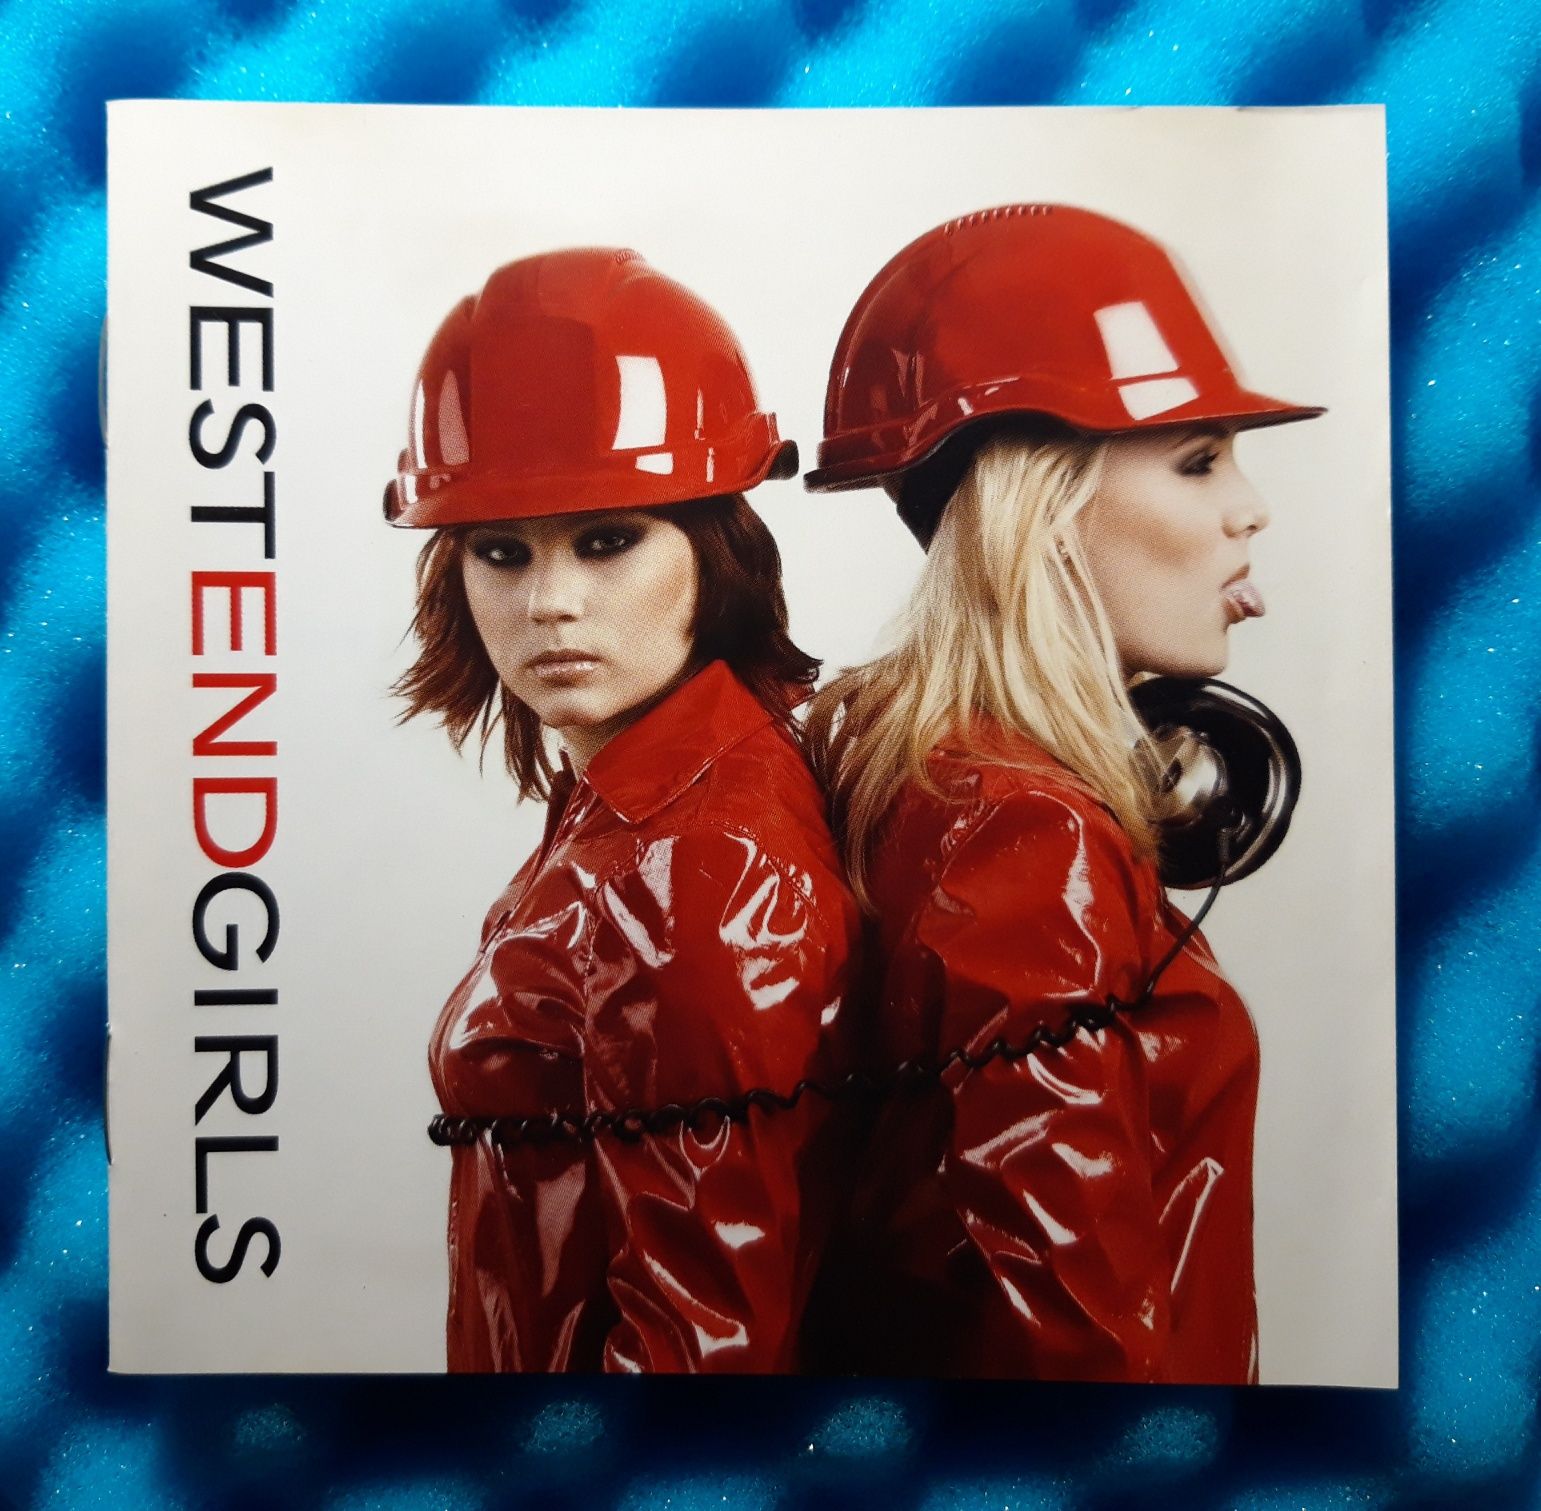 West End Girls ‎– Goes Petshopping (CD, 2008)